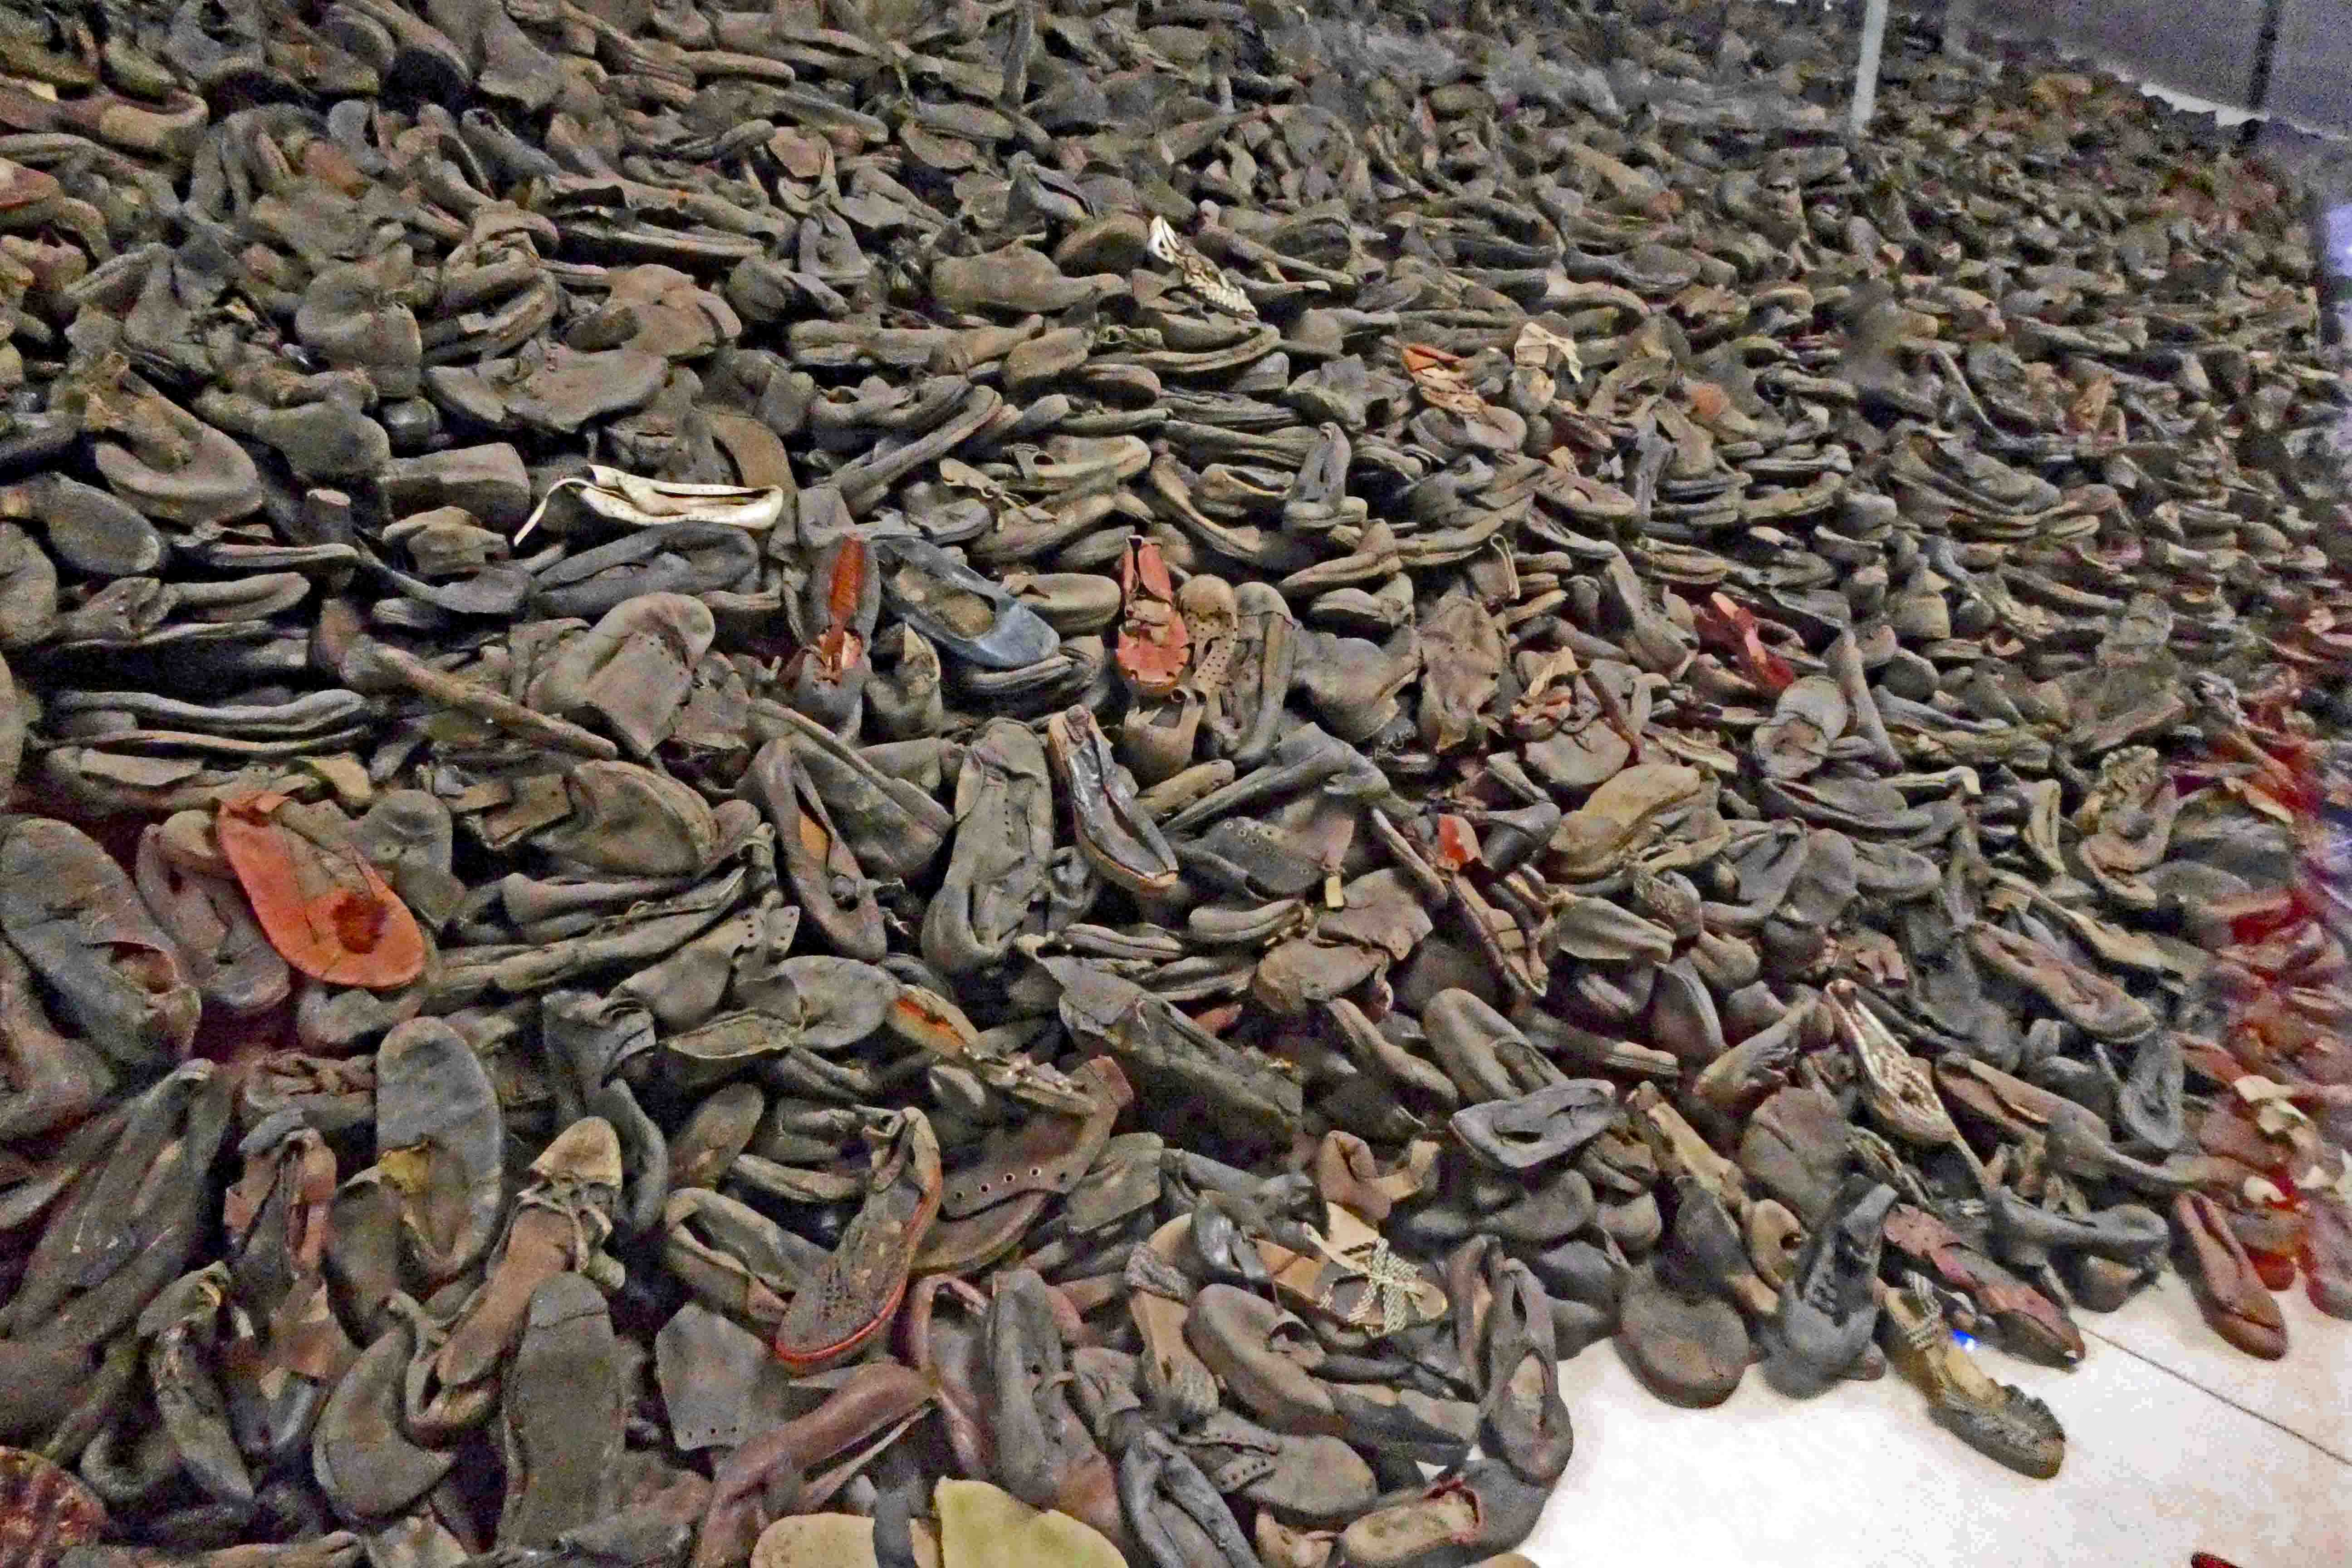 Piles of shoes from victims in Auschwitz